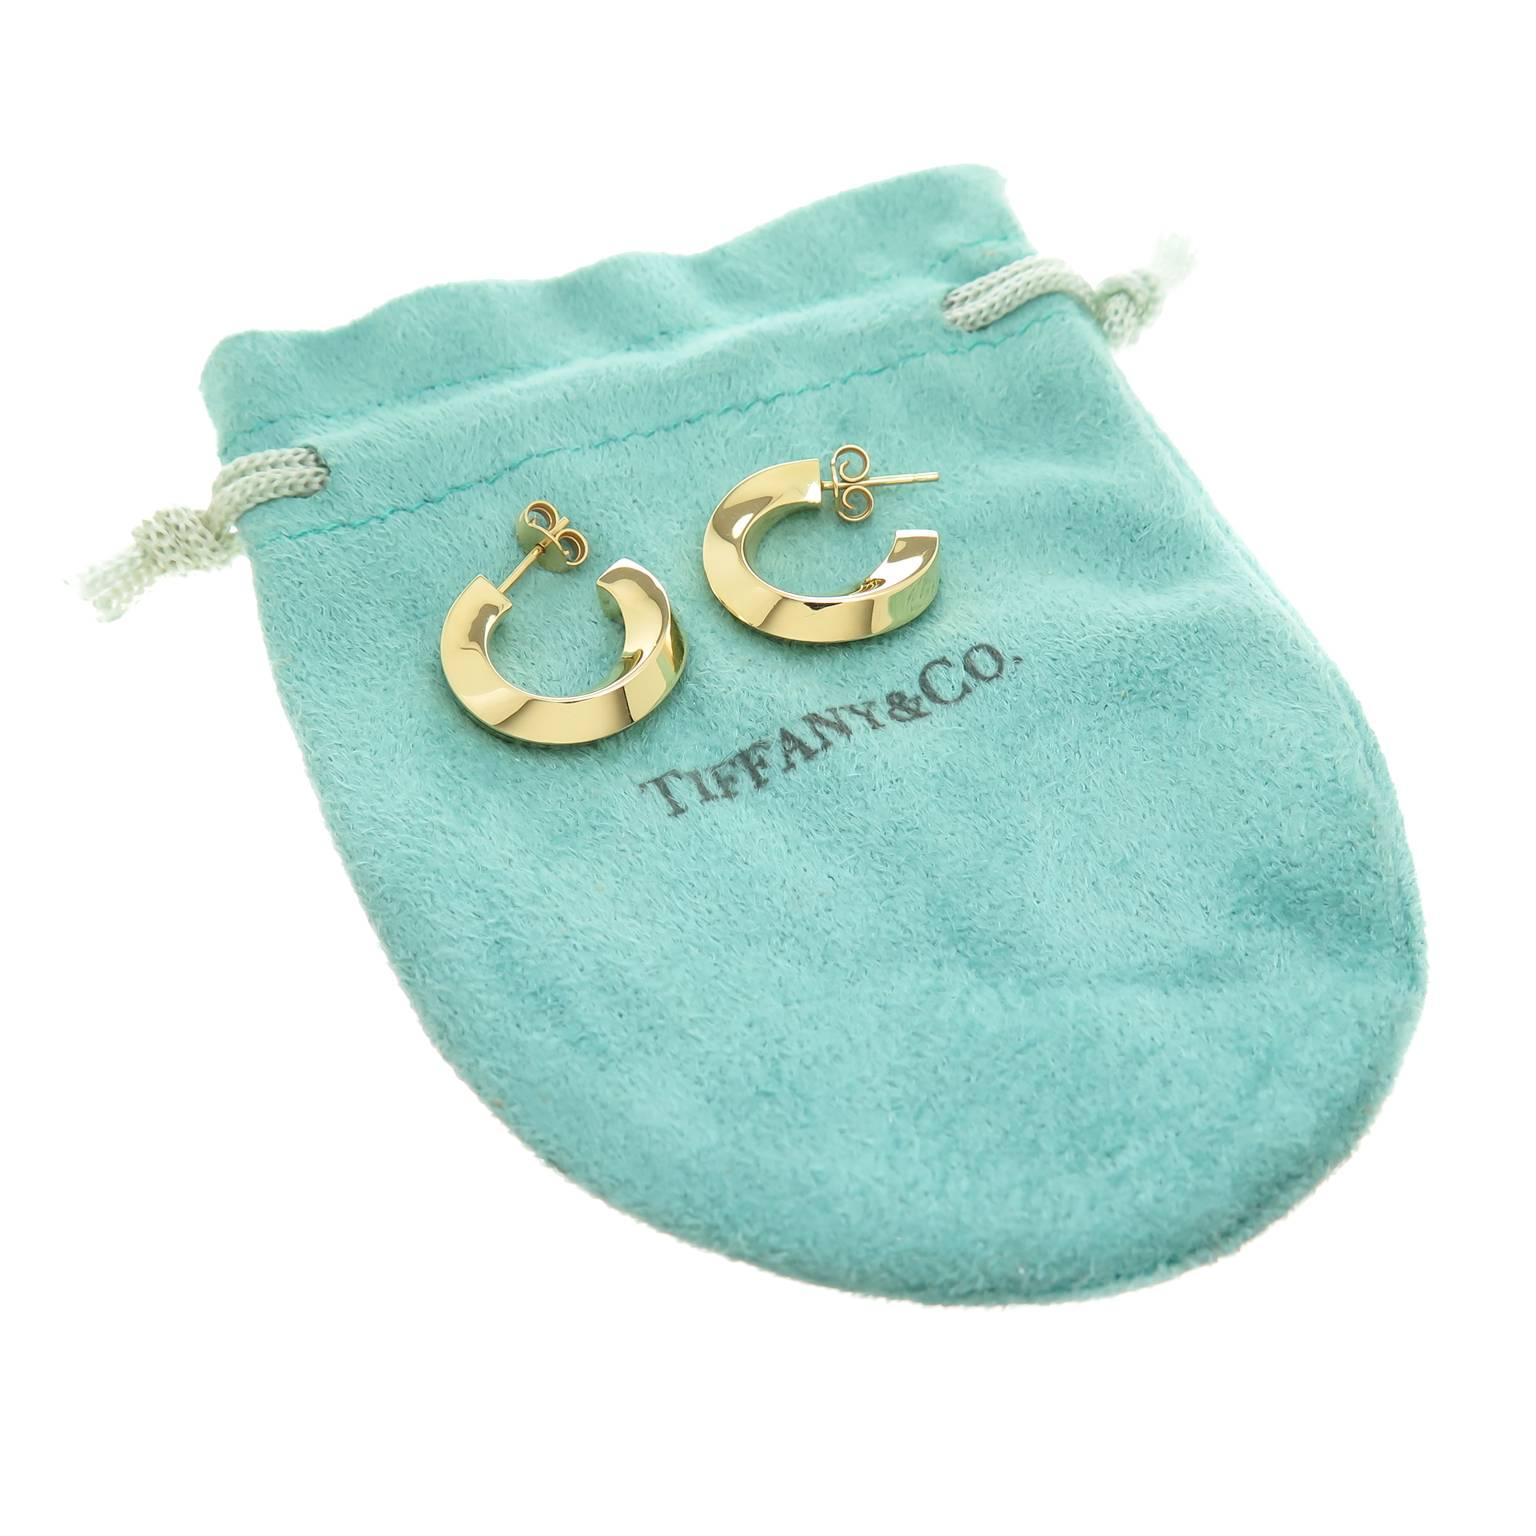 Circa 2000 Tiffany & Company 18K yellow Gold Hoop Earrings, of solid construction in a slight twist design, measuring 3/16 inch wide and 3/4 inch in diameter. Comes with a Tiffany Gift pouch.